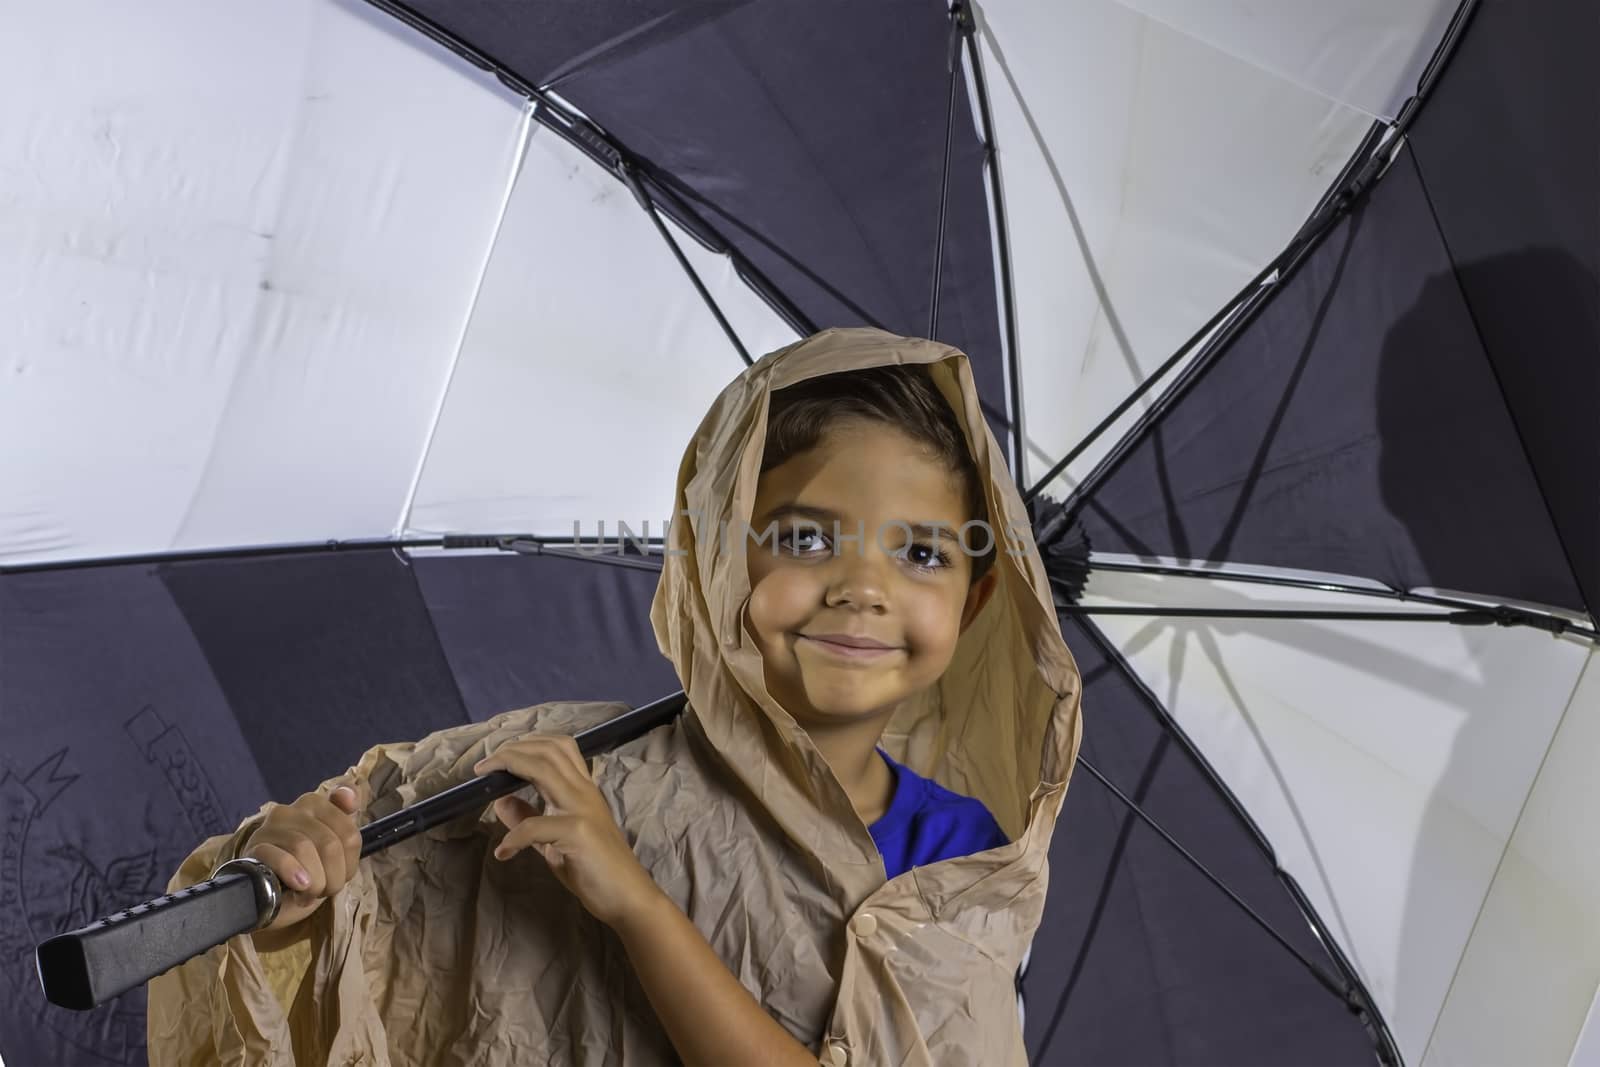 A young boy wearing a poncho and carryinga large black and white umbrella.